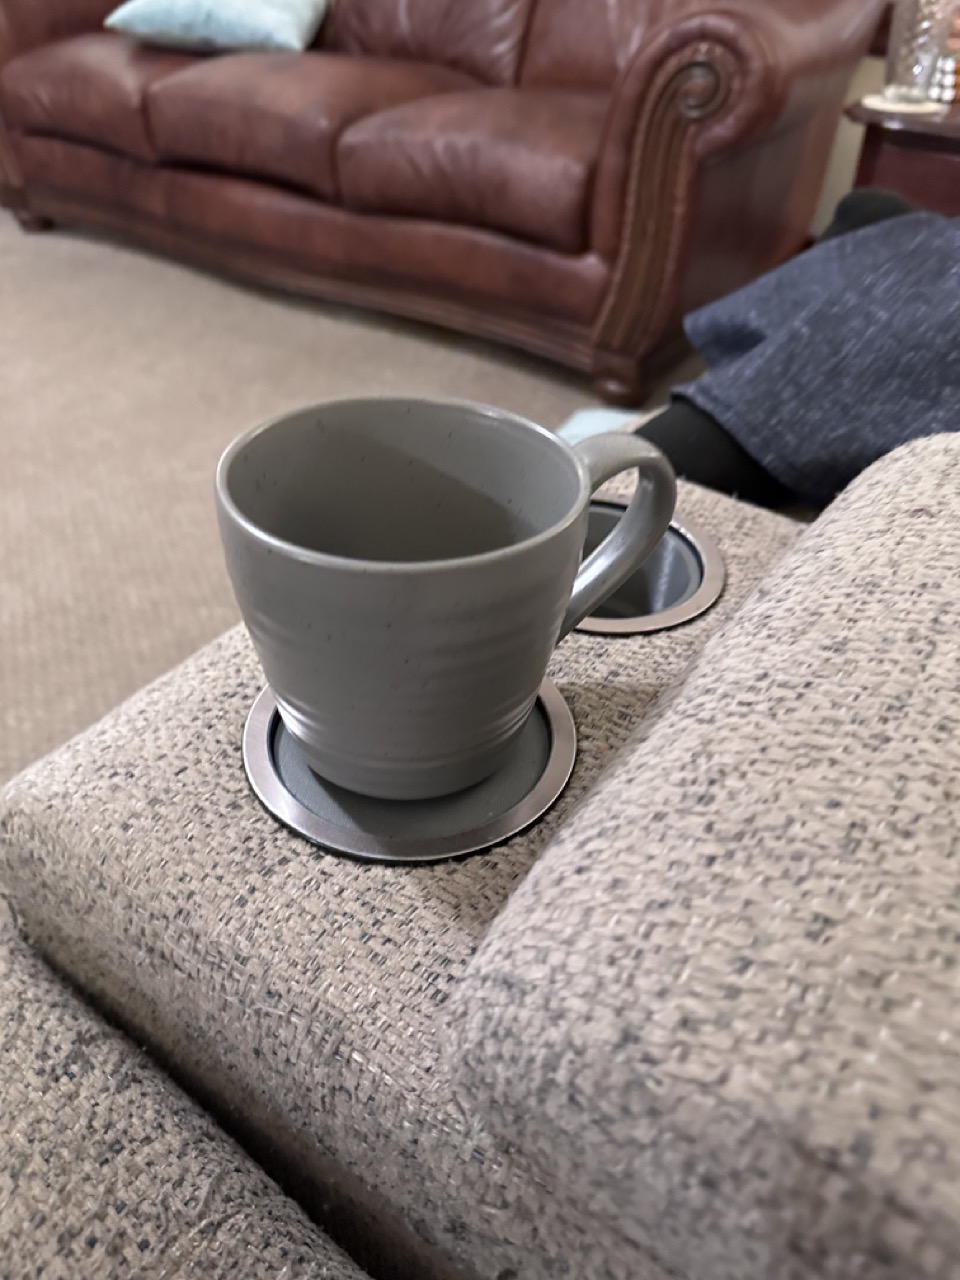 Couch Cupholder Mug Riser by TechInDepth